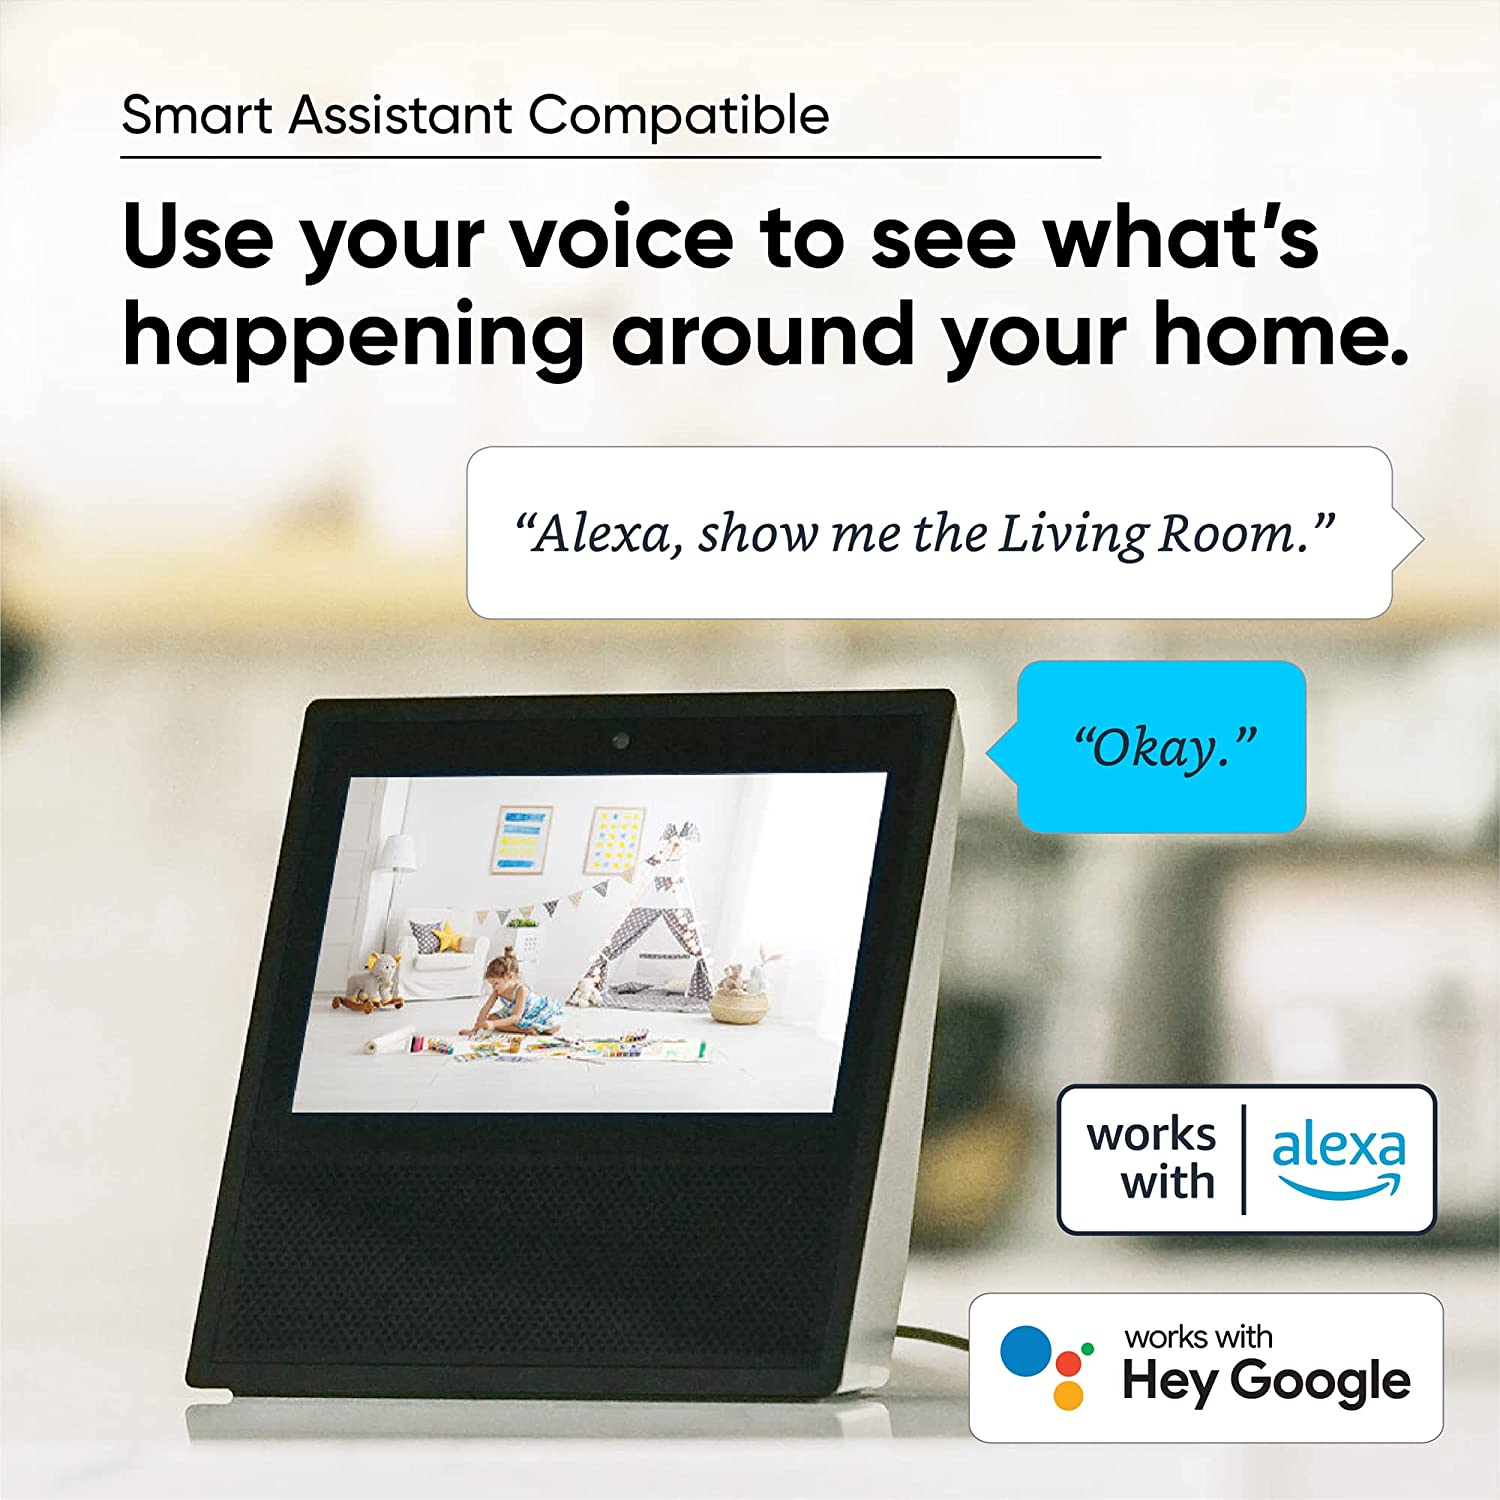 Text overlay "Smart Assistant Compatible.". Alexa screen device with image of kid playing in living room.